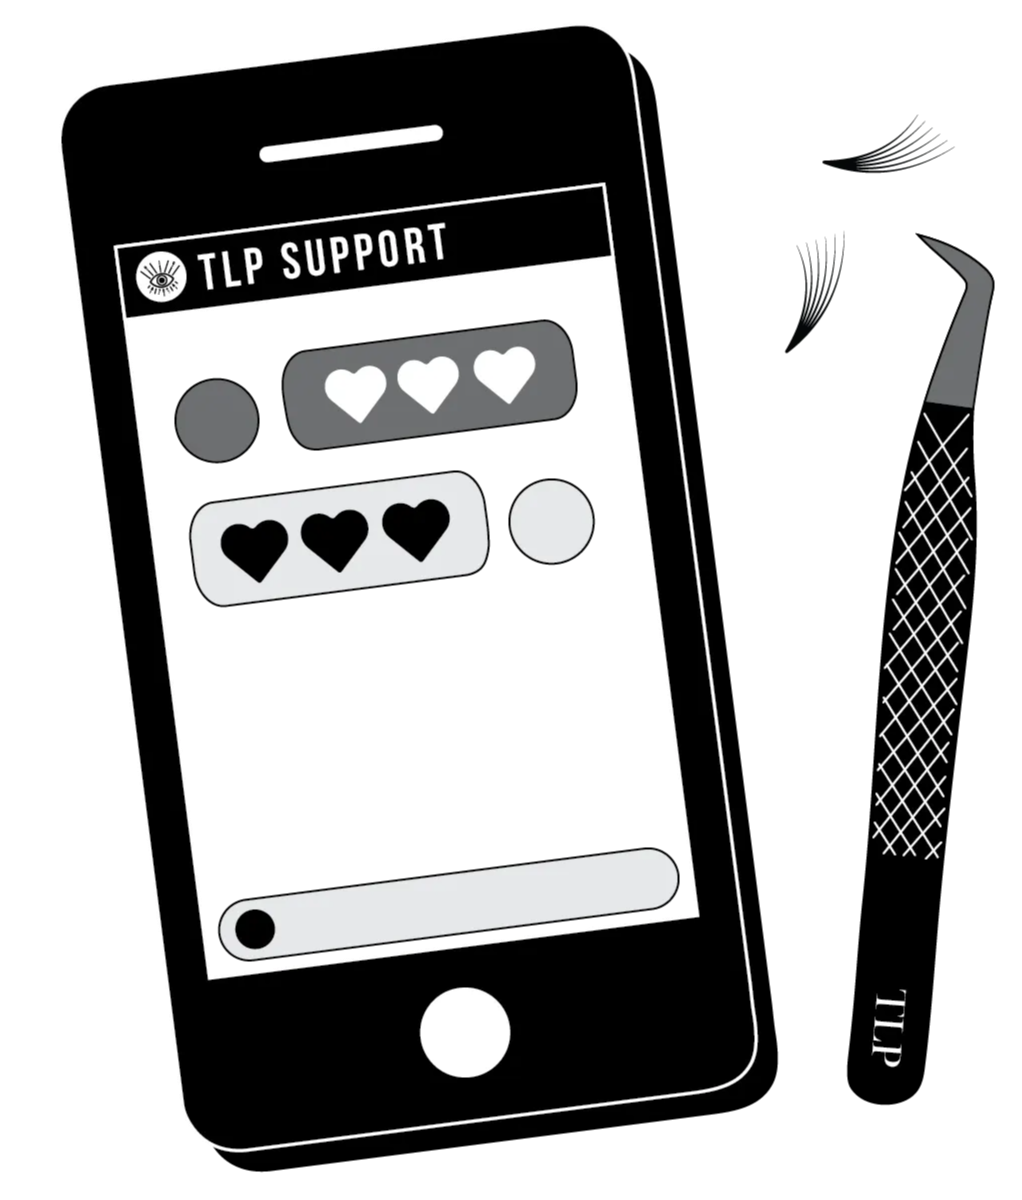 Cell phone messaging support with tweezers and lash fans